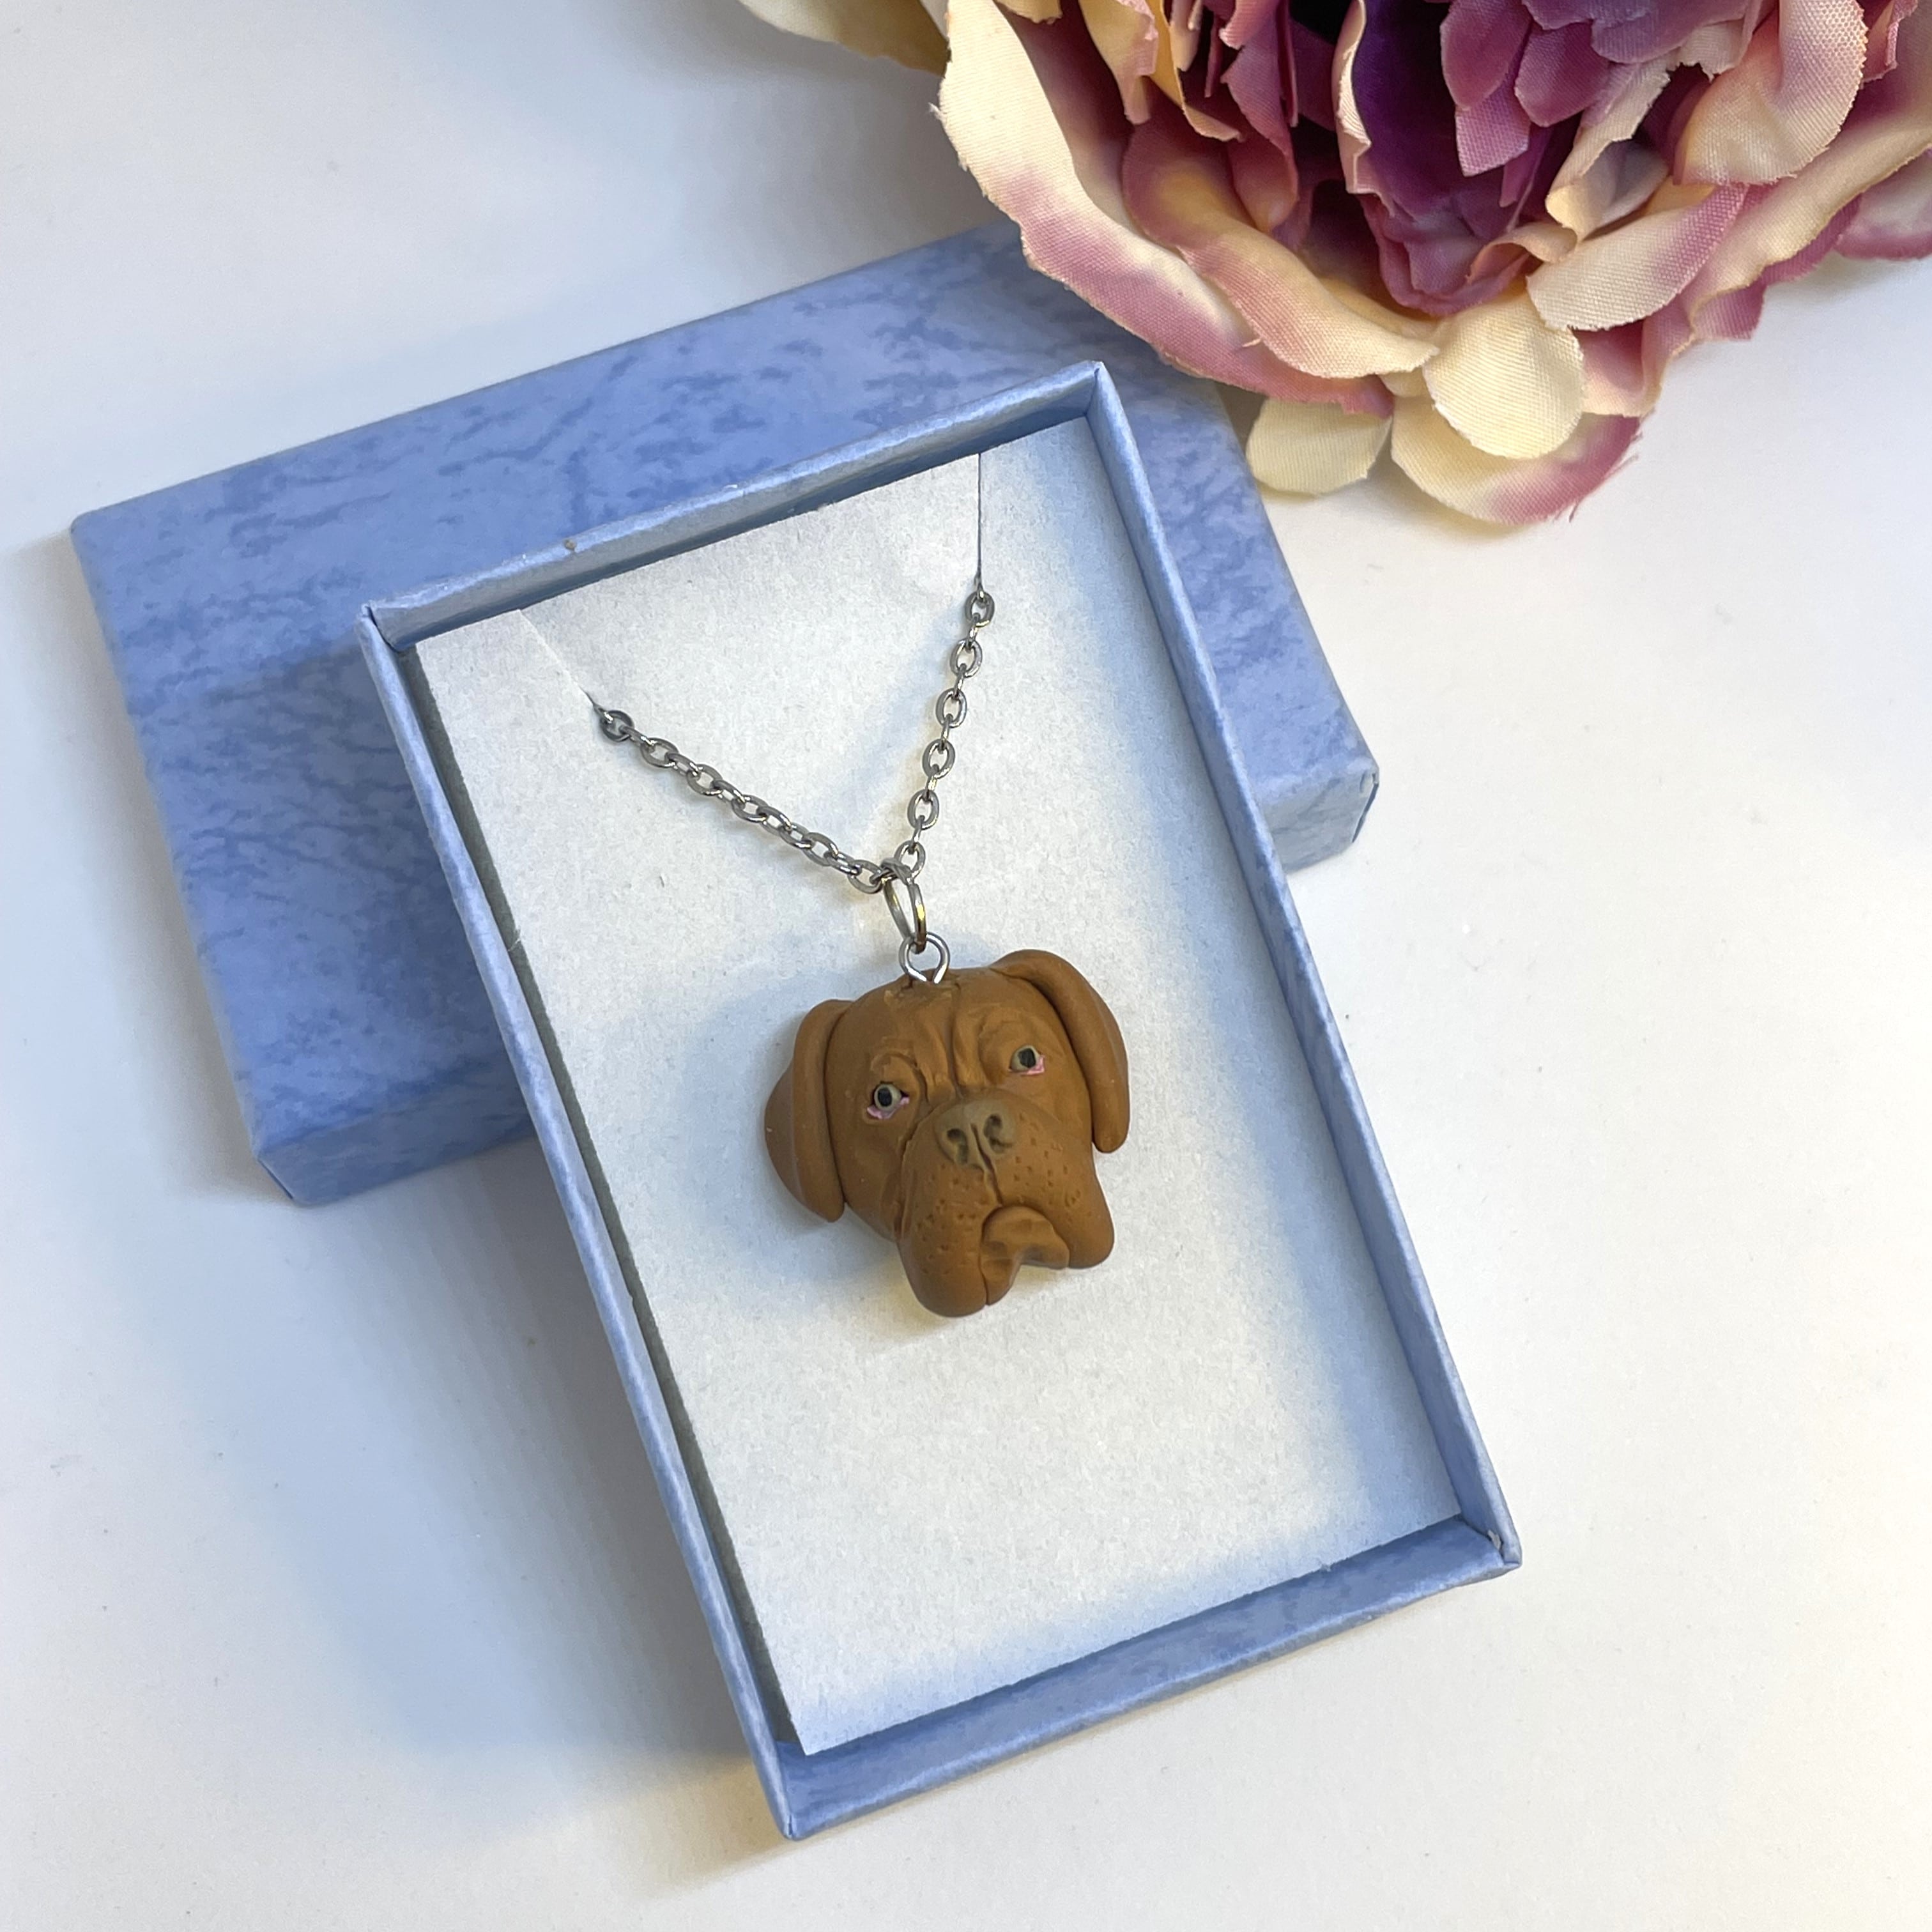 Customized Pet Portrait Necklace, Personalized Pet Memorial Jewelry Gift,  Pet Photo Paw Name Engraved Necklace Unique Custom Dog Cat Animal Necklace  for Animal Lover Remembering Beloved (1, Sliver) : Amazon.co.uk: Pet  Supplies